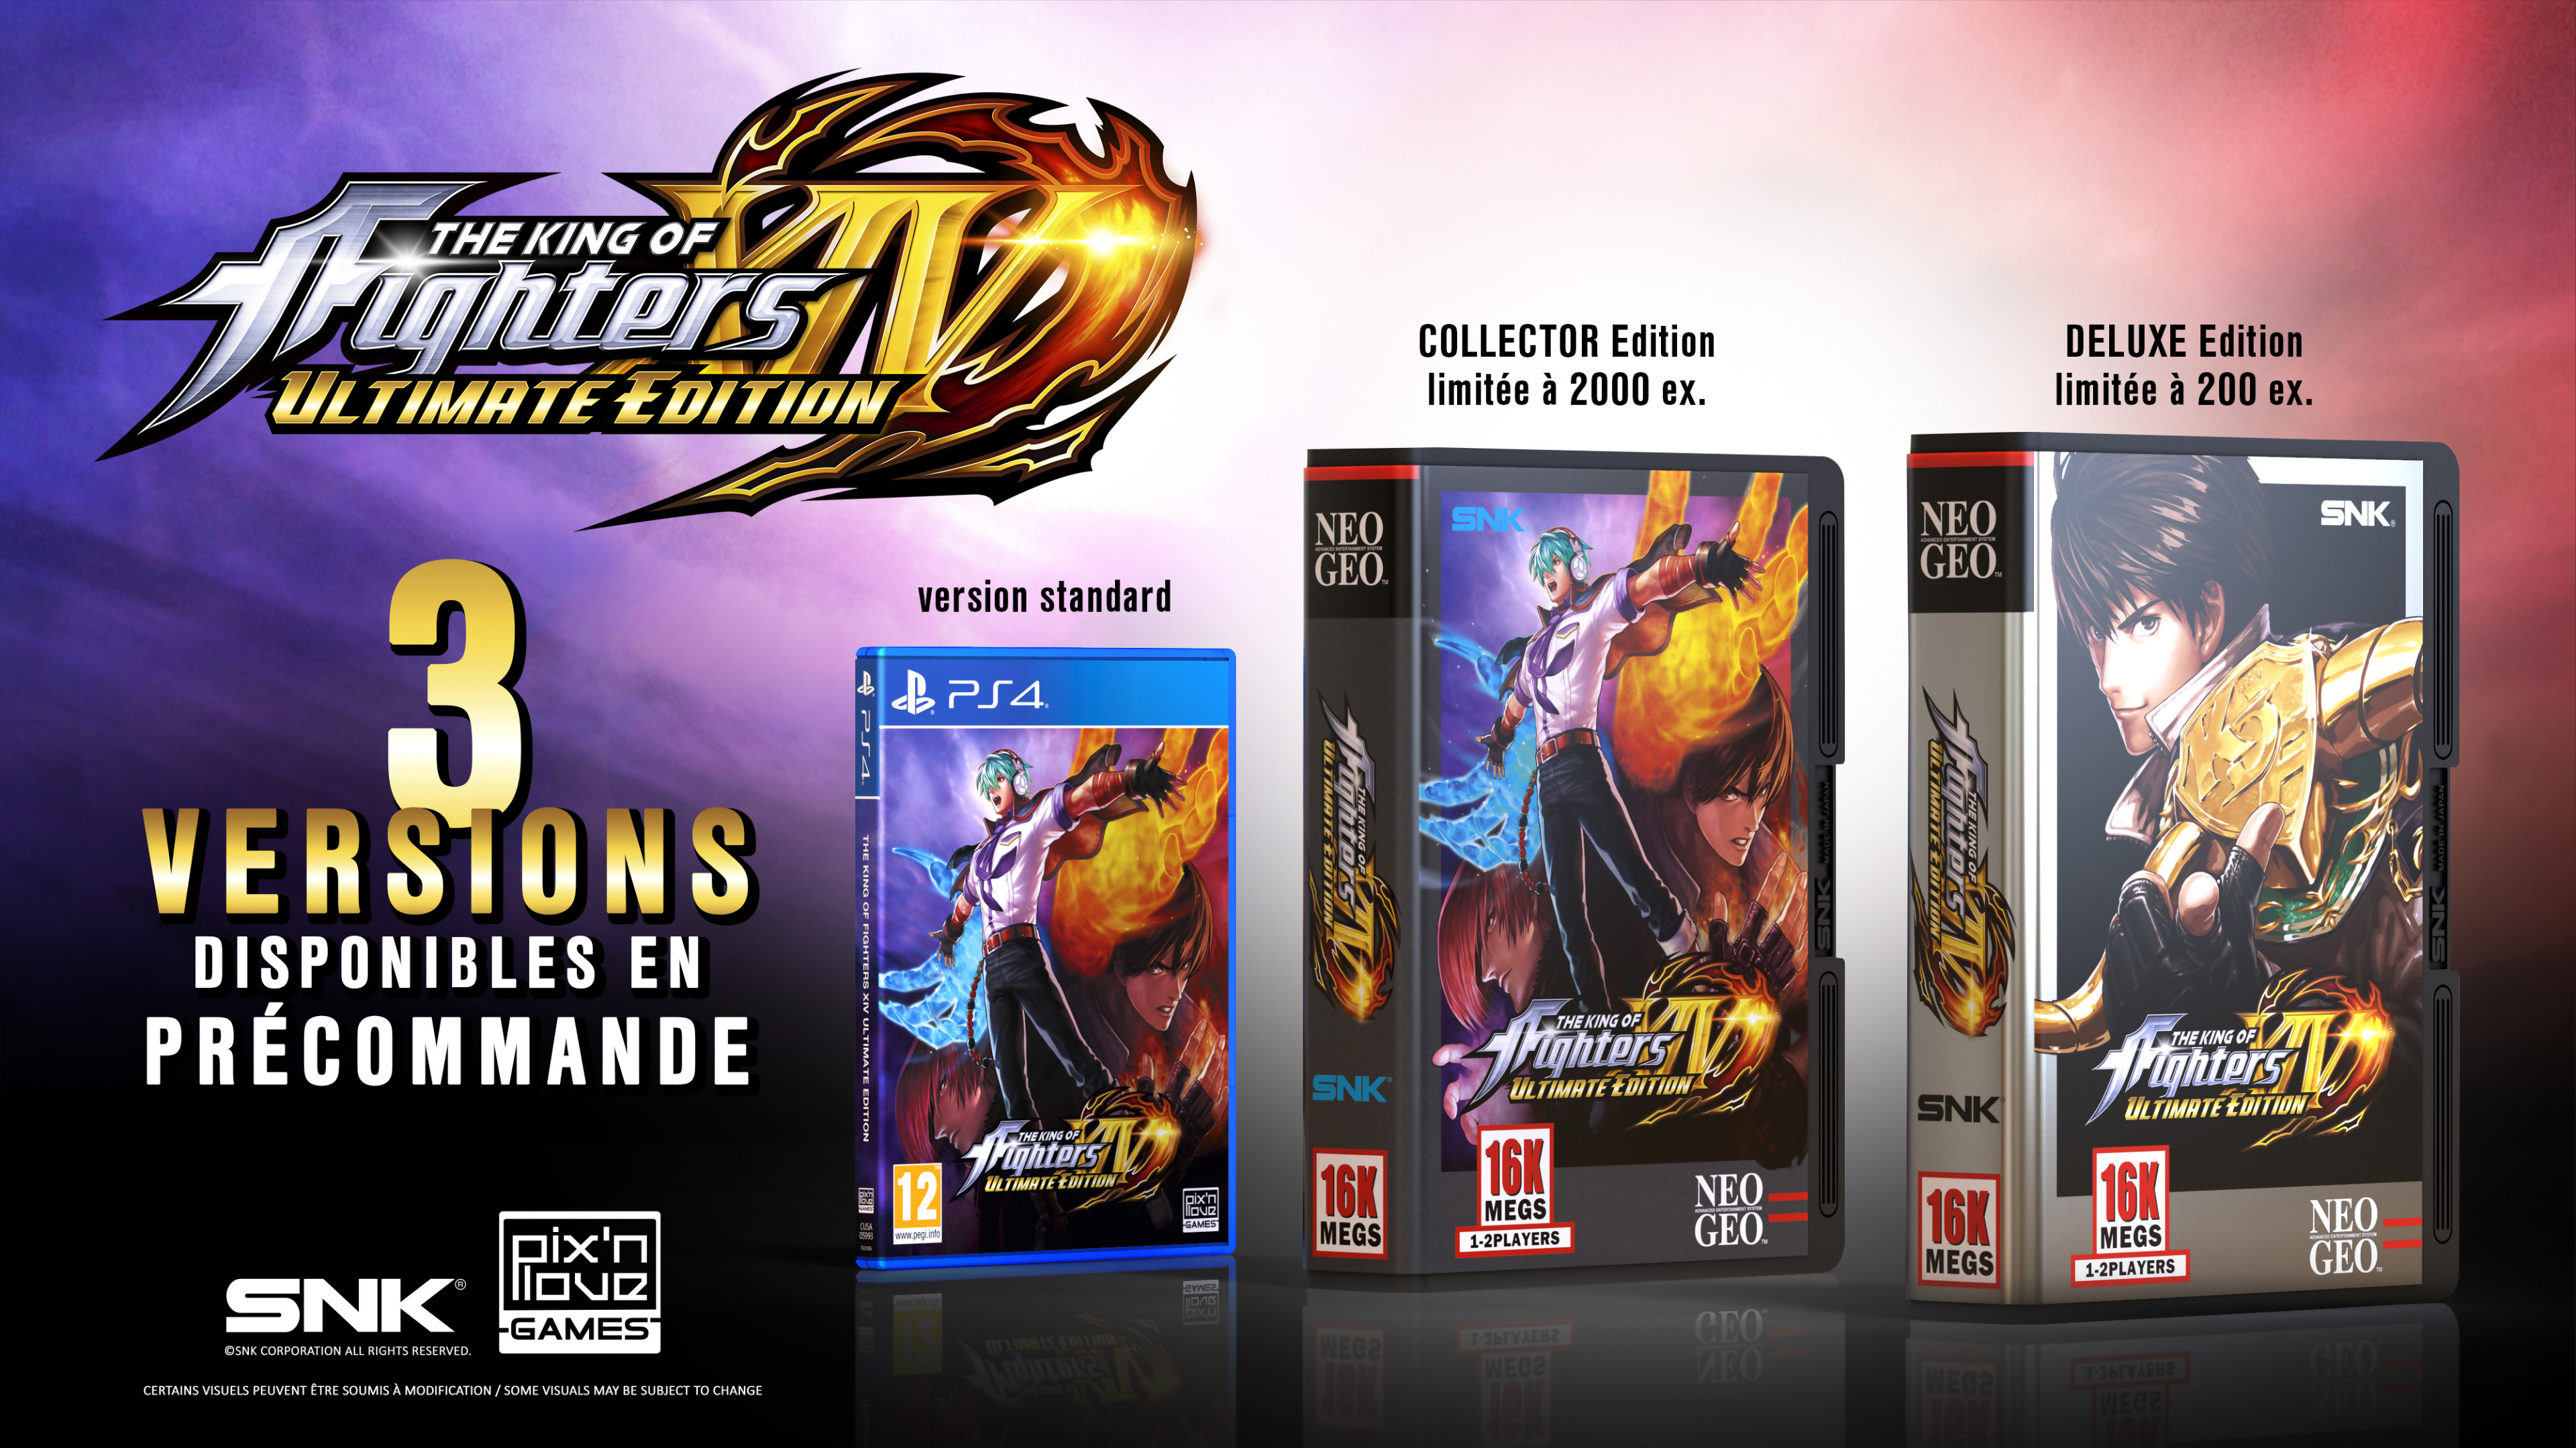 Artworks The King Of Fighters Xiv Ultimate Edition